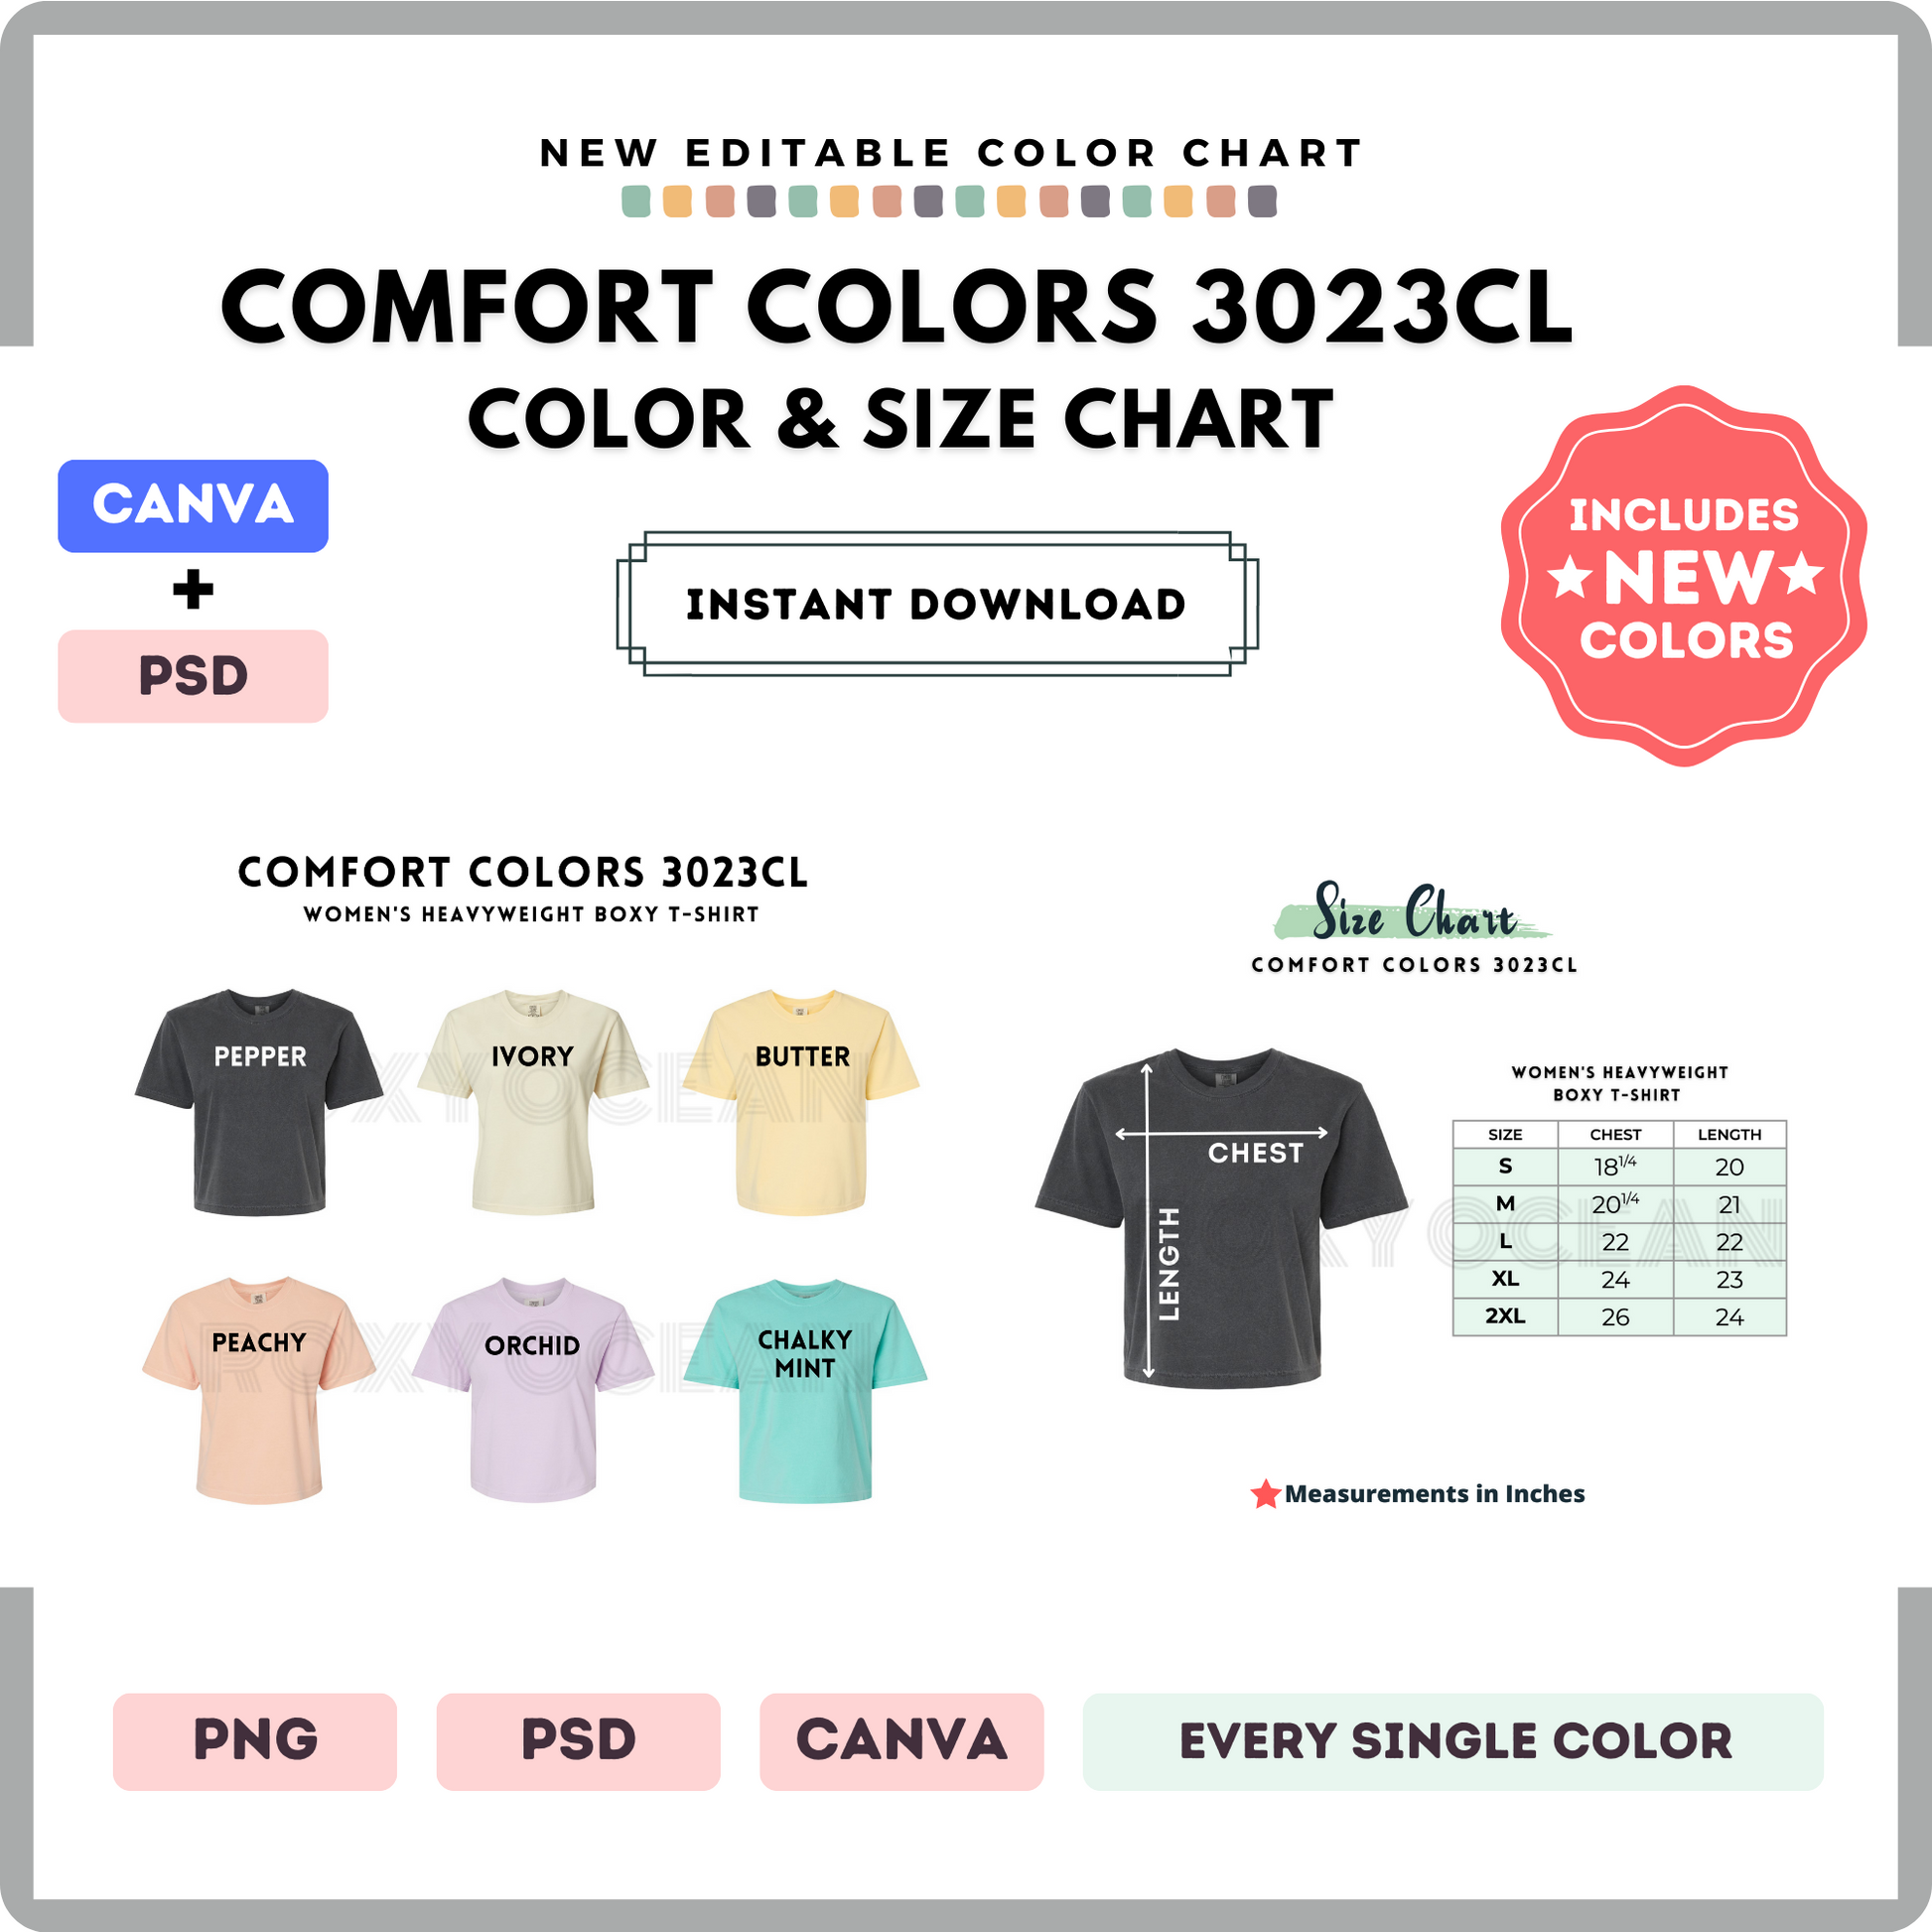 Comfort Colors 3023CL Color and Size Chart